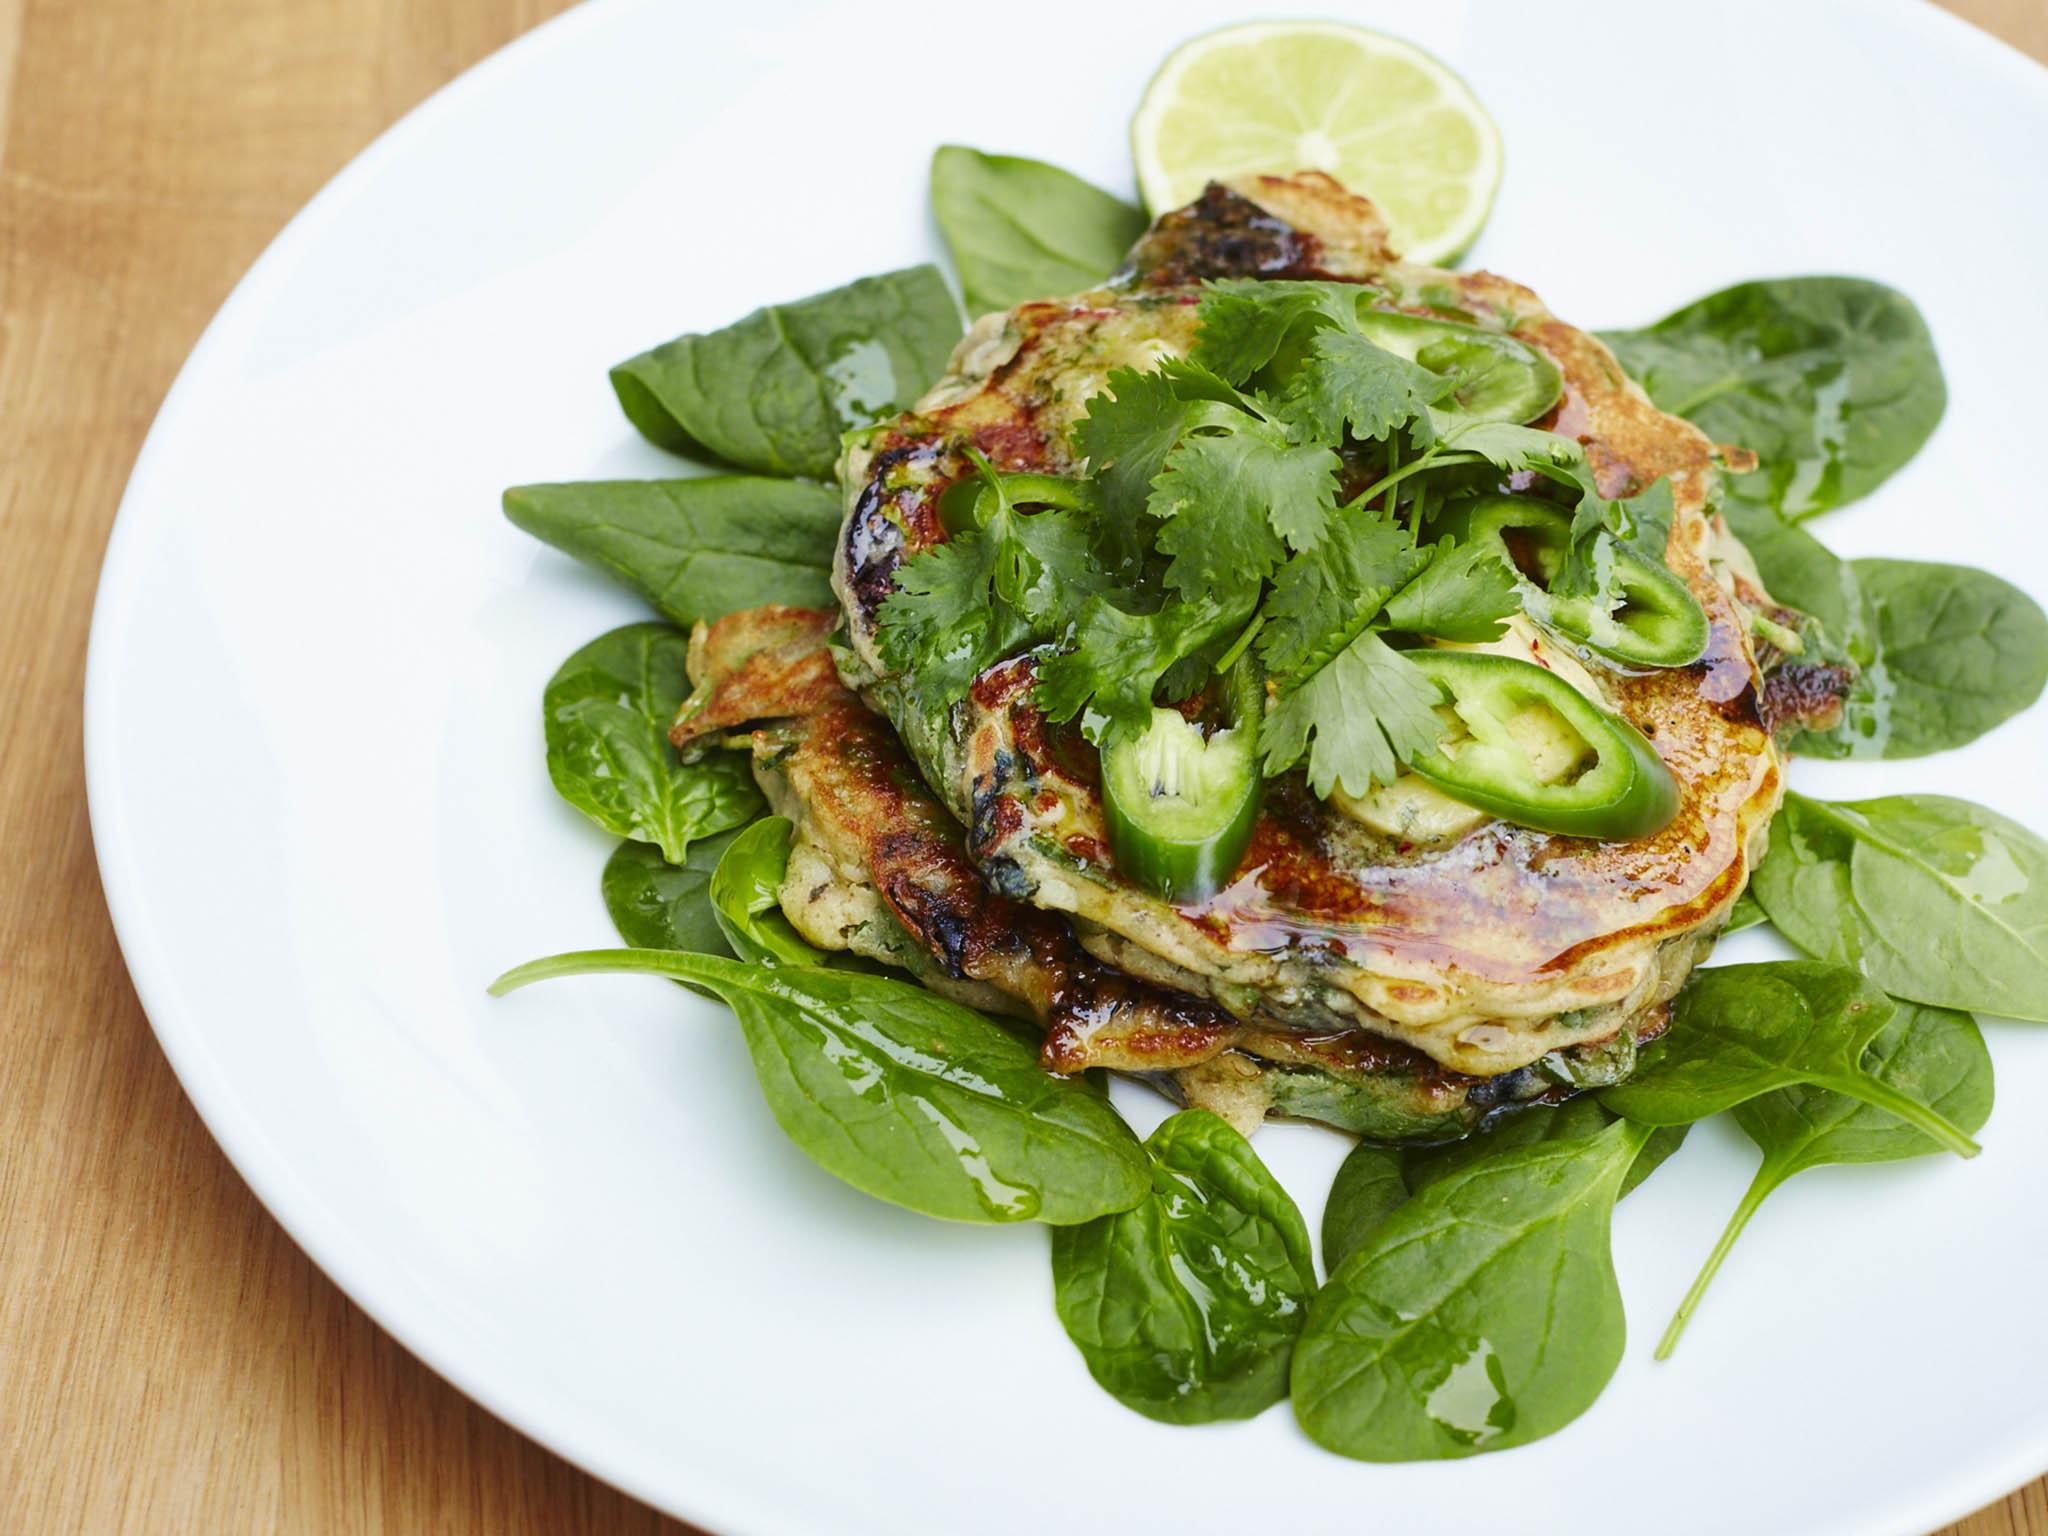 The 100 baby greens pancakes are made with spring onions, spinach, cumin, green chilli for a health kick